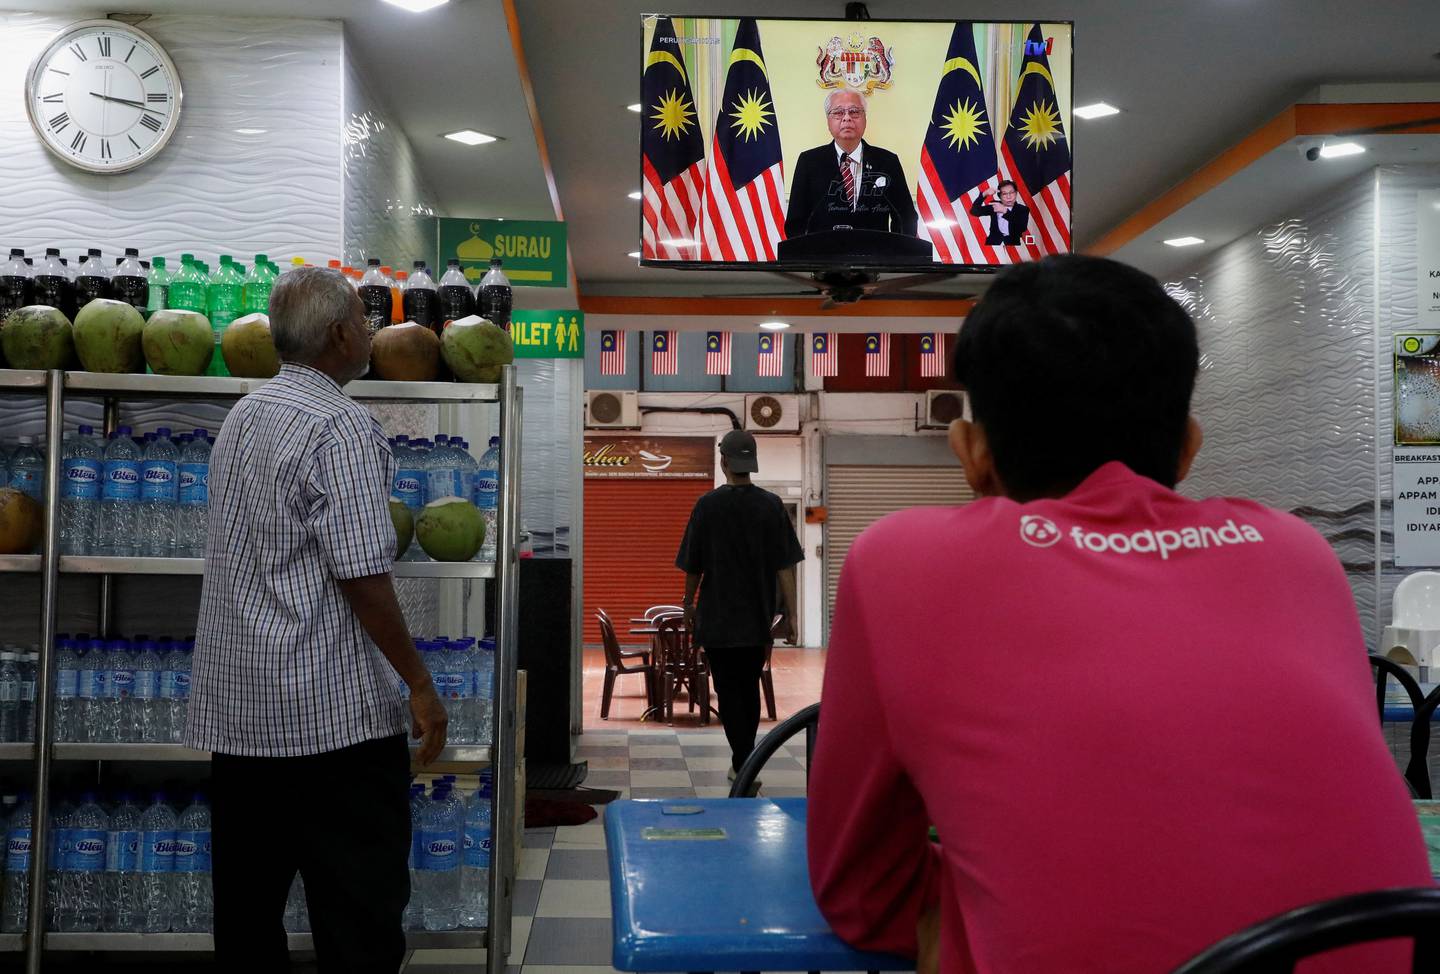 People at a restaurant watch the announcement by Malaysian Prime Minister Ismail Sabri Yaakob dissolving the parliament and calling for general elections, in Kuala Lumpur, on October 10. Reuters